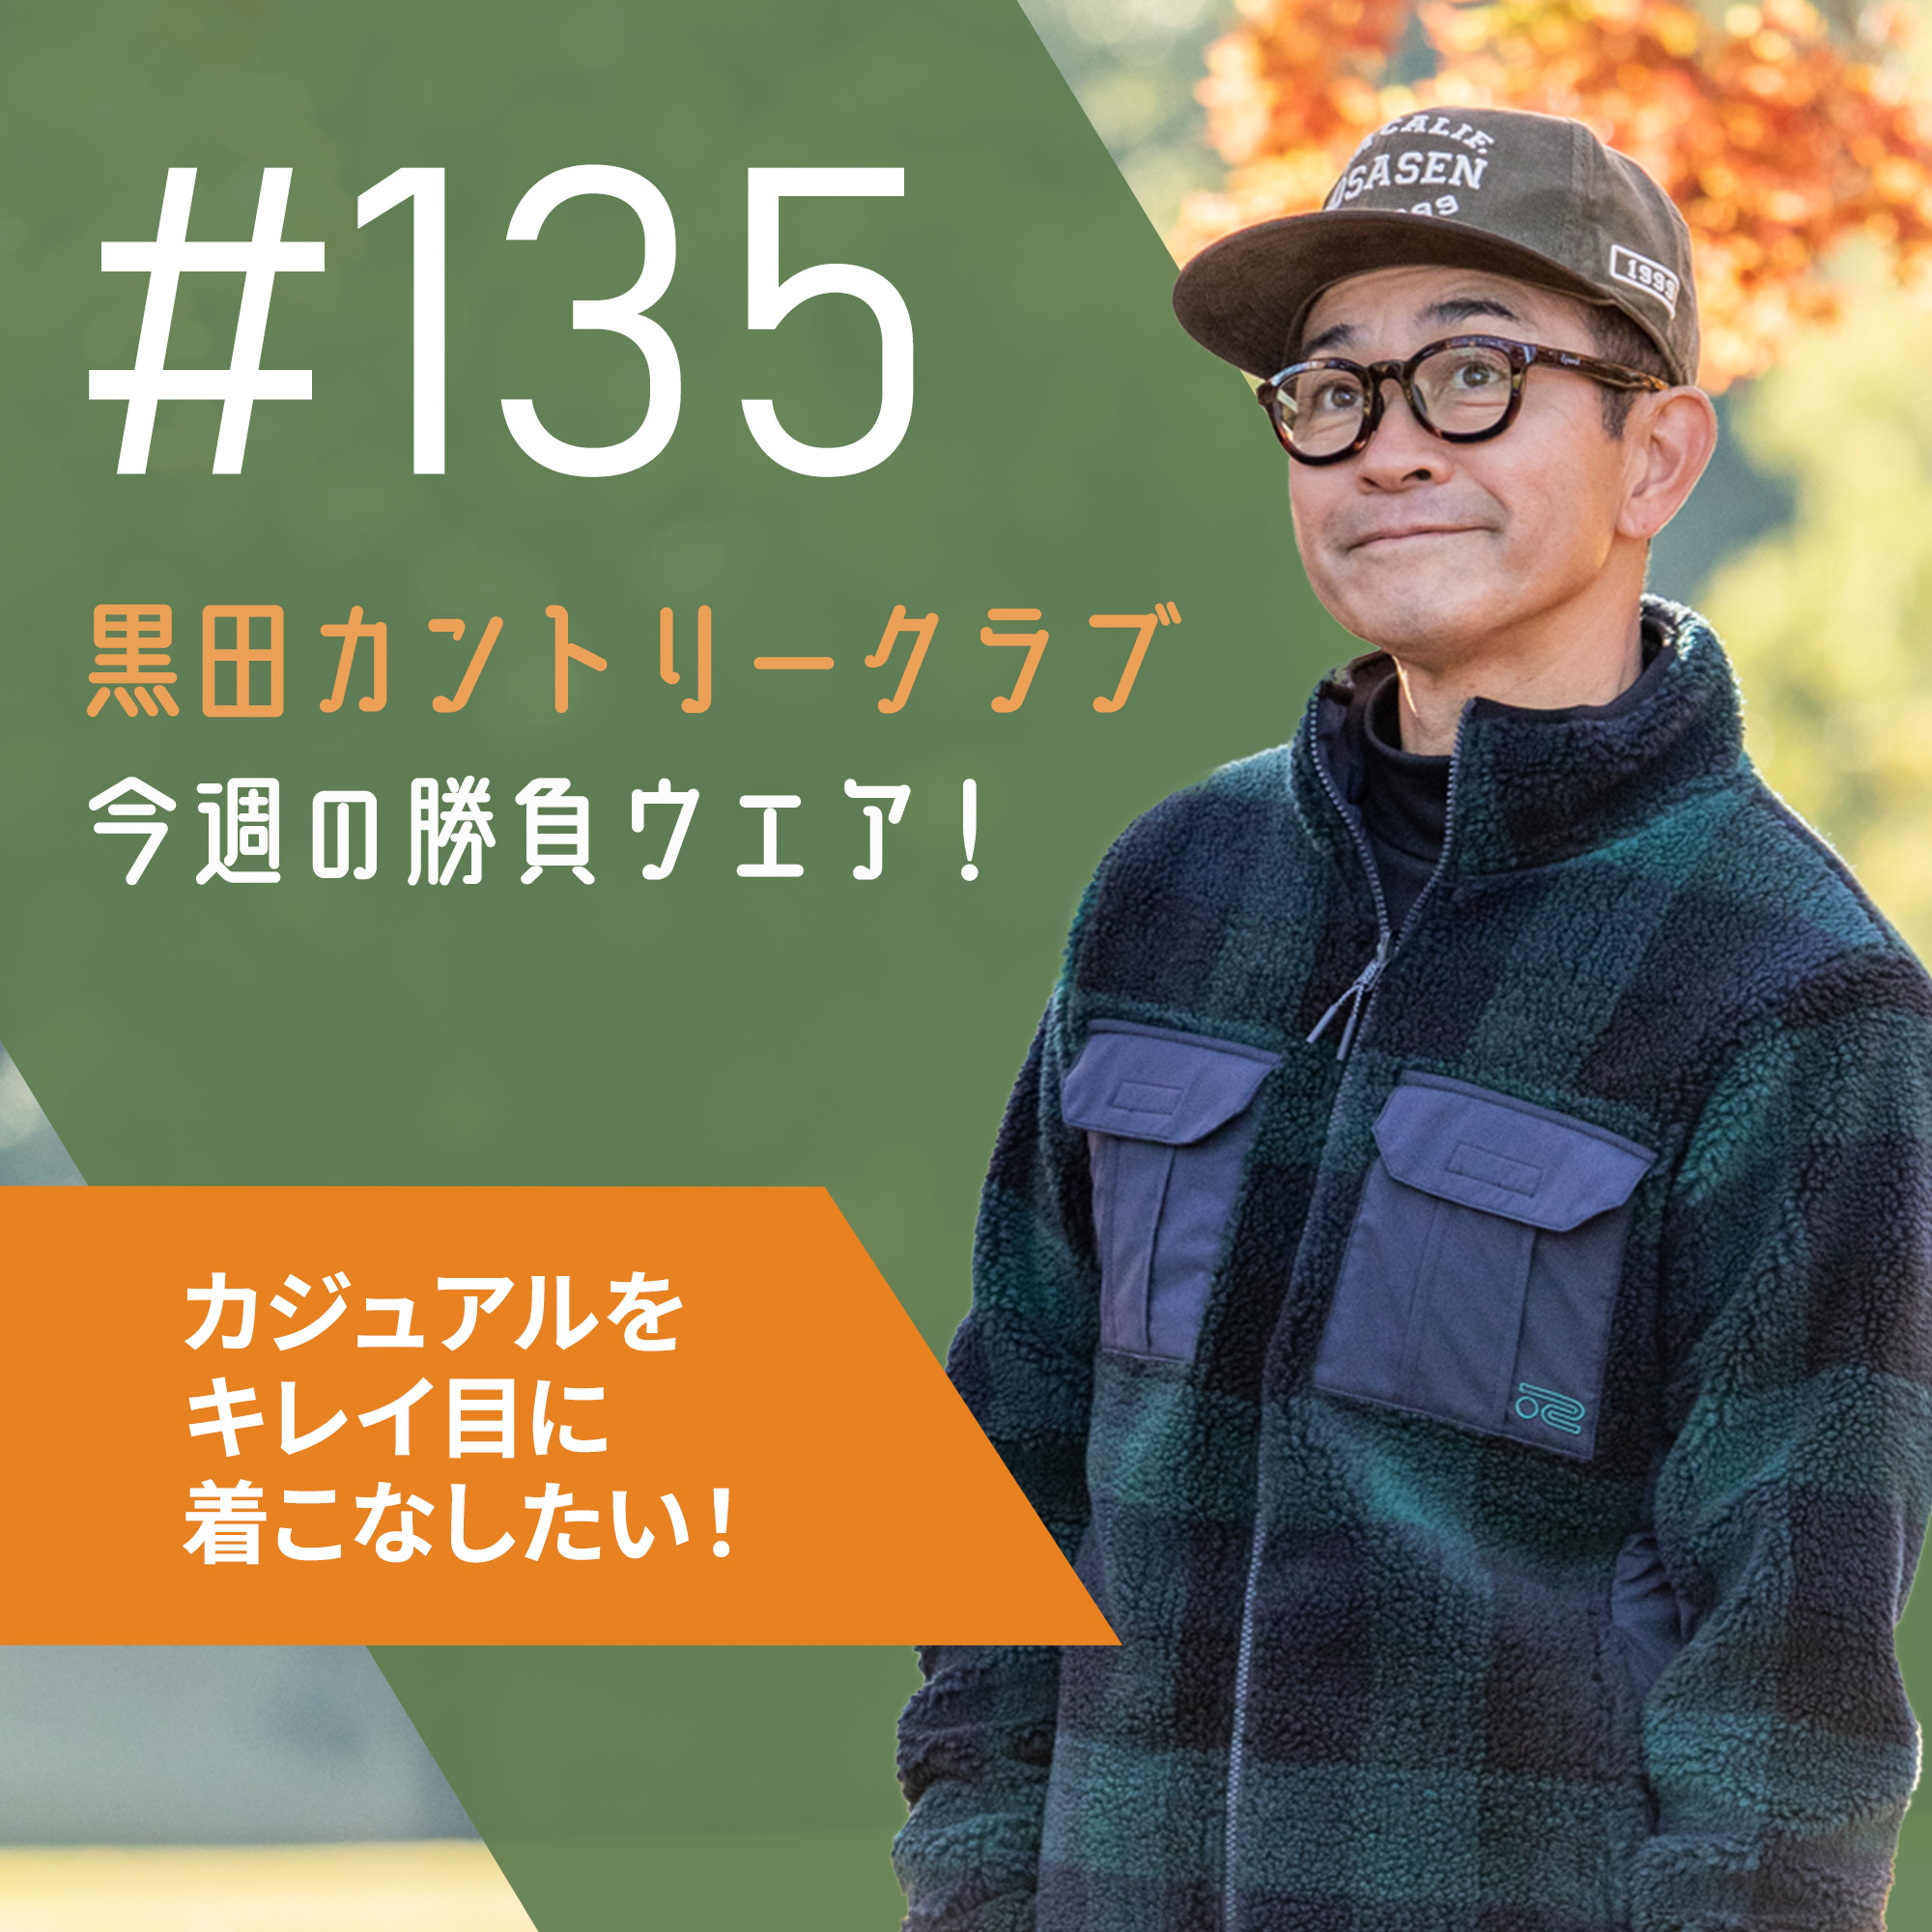 WE RECOMMEND-221212-黒田カントリークラブ#135